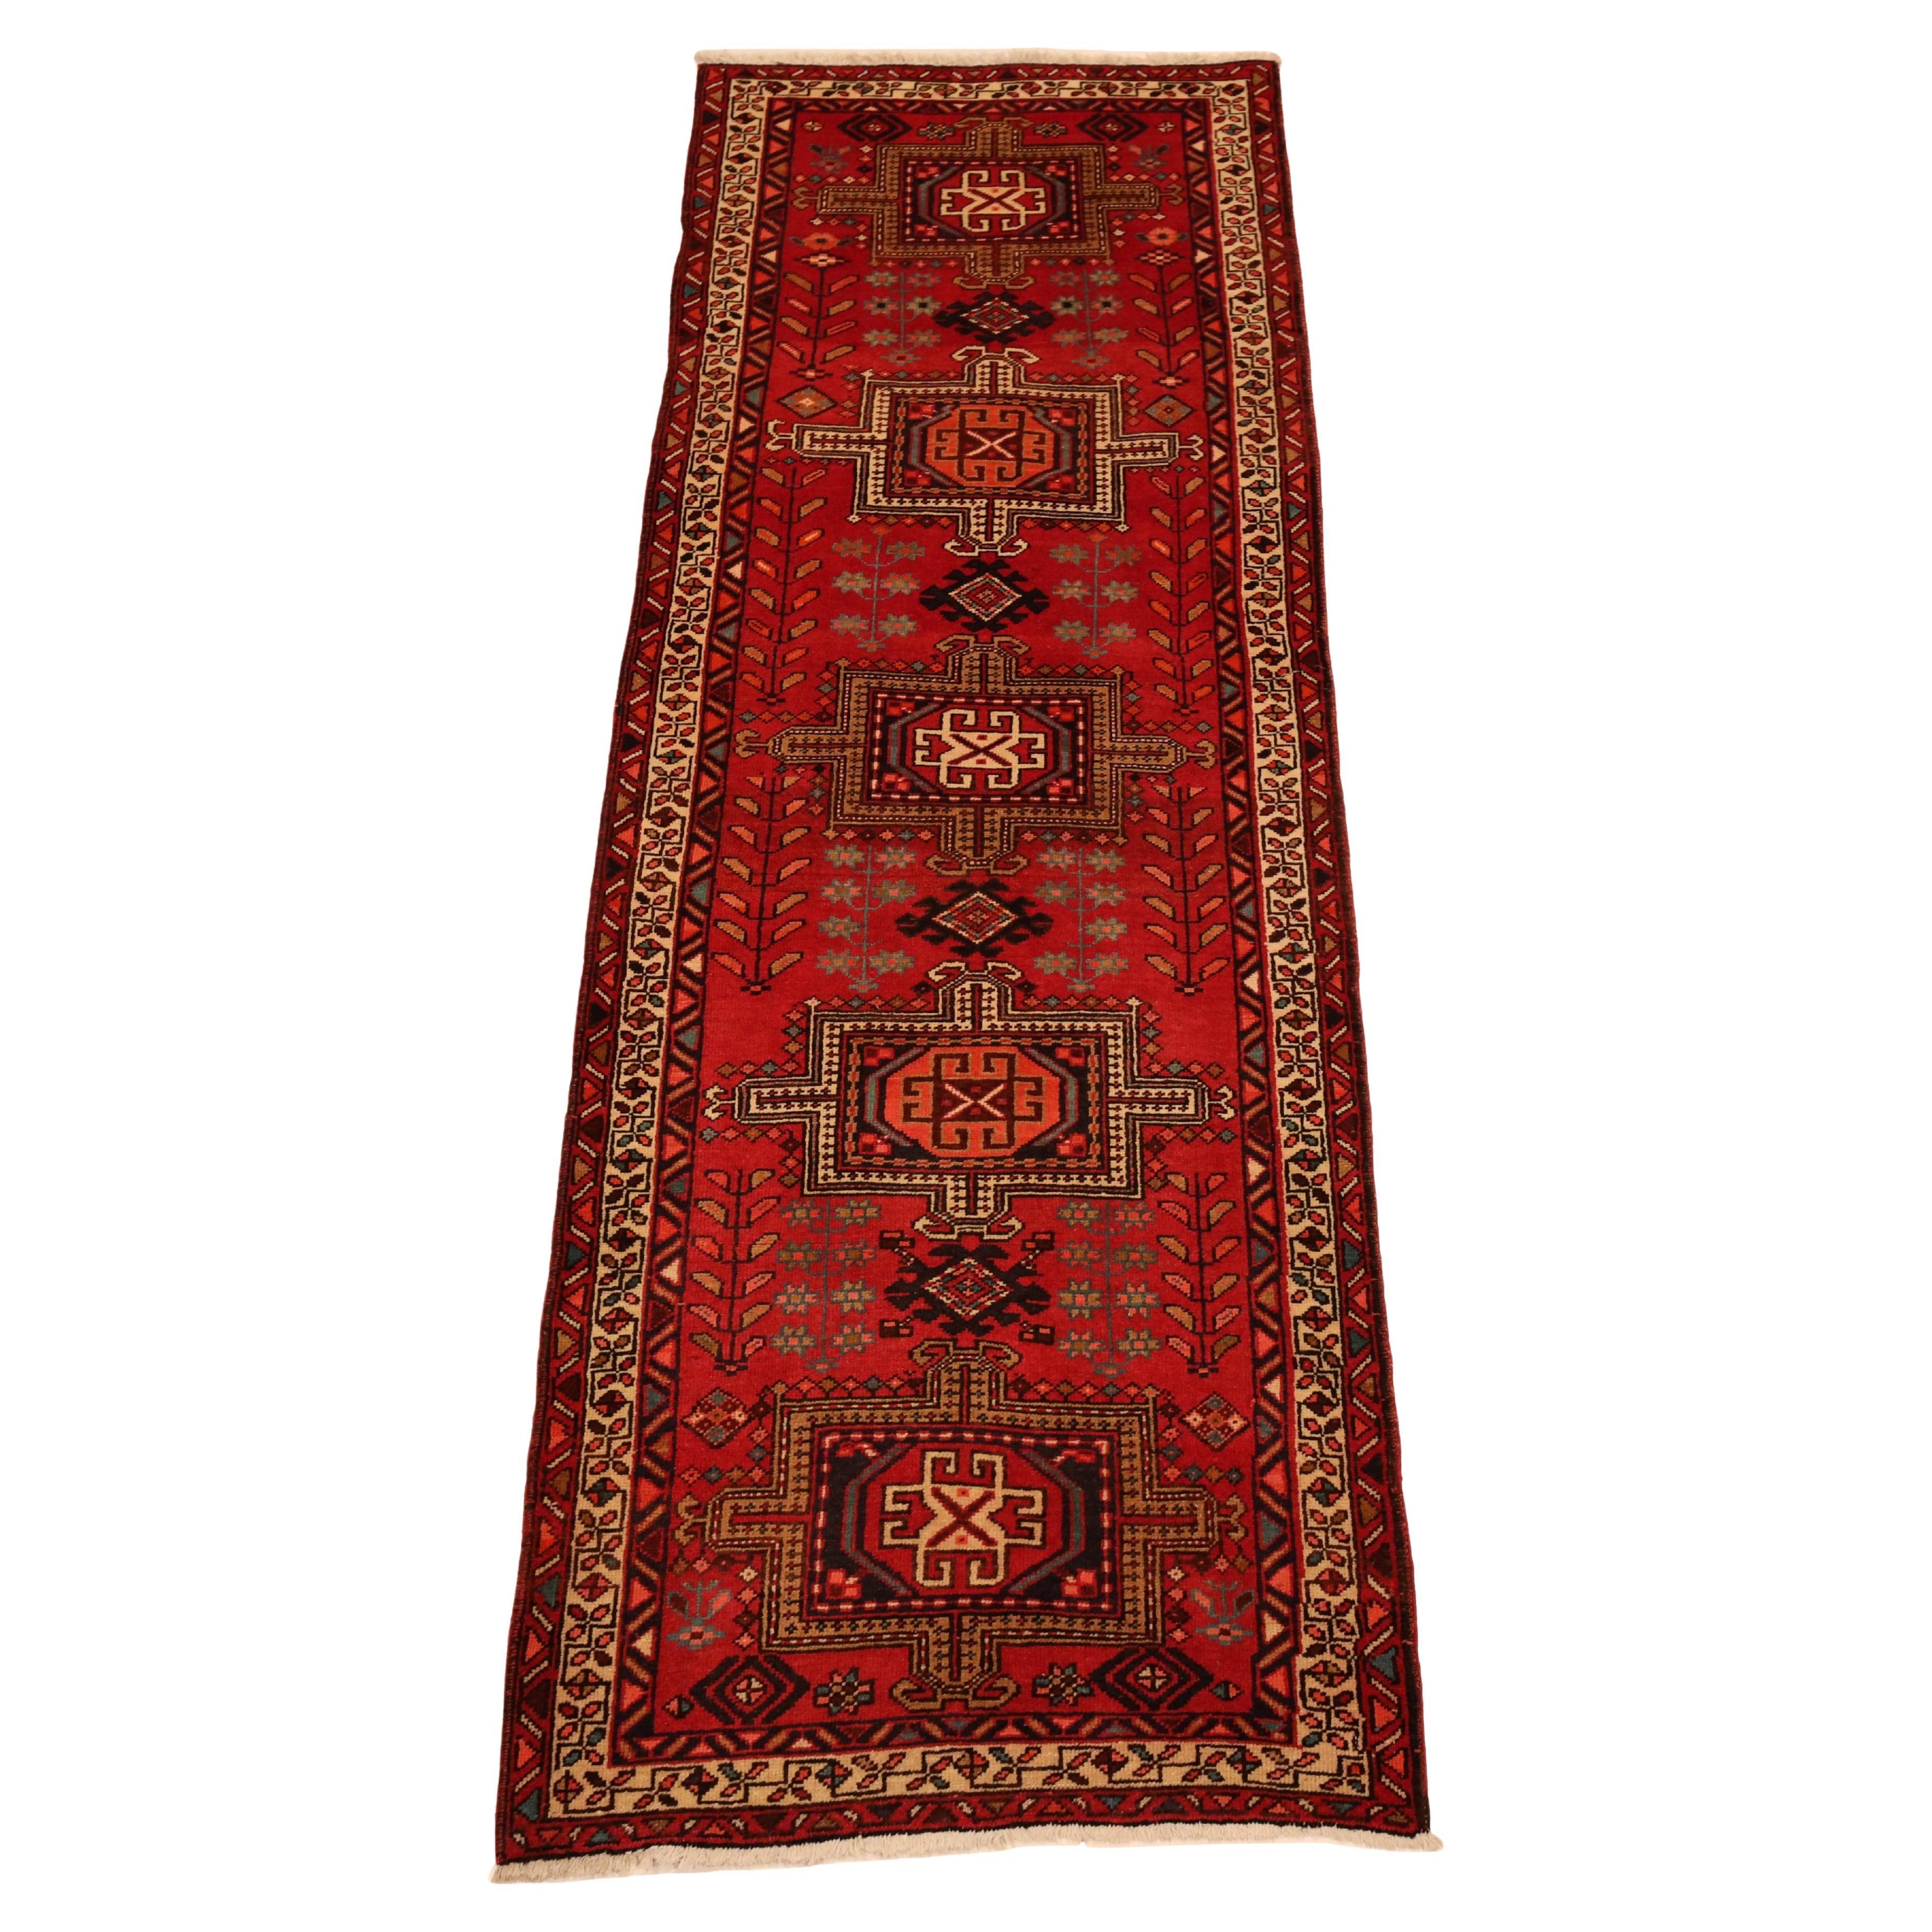 North-West Persian Vintage Runner - 3'3" x 10'1" For Sale